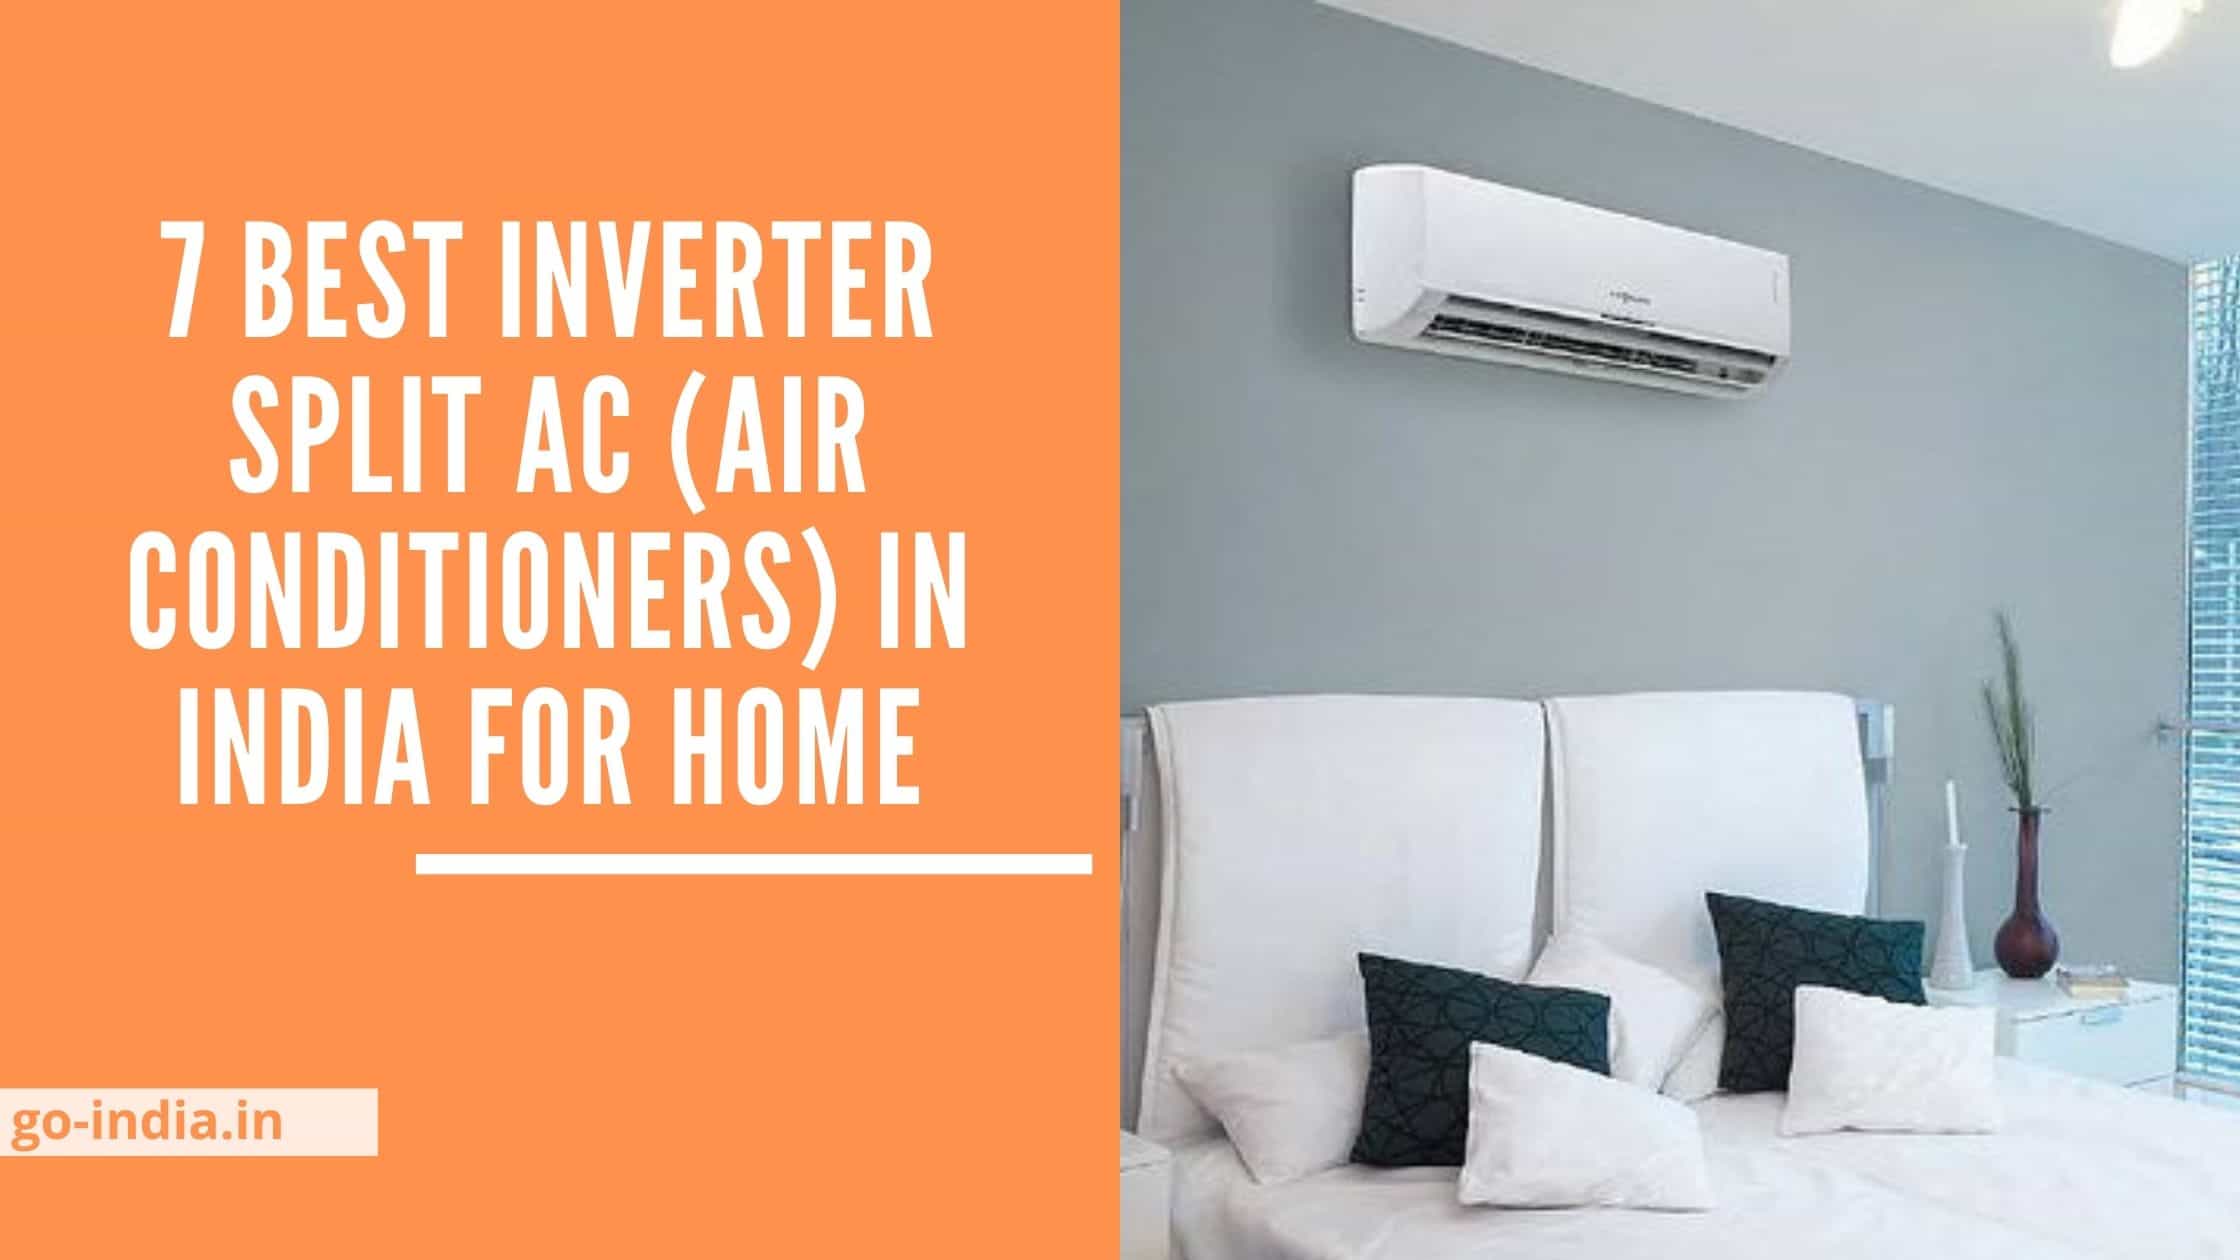 7 Best Inverter Split AC (Air Conditioners) in India for Home (2022) – Buyers Guide & Review